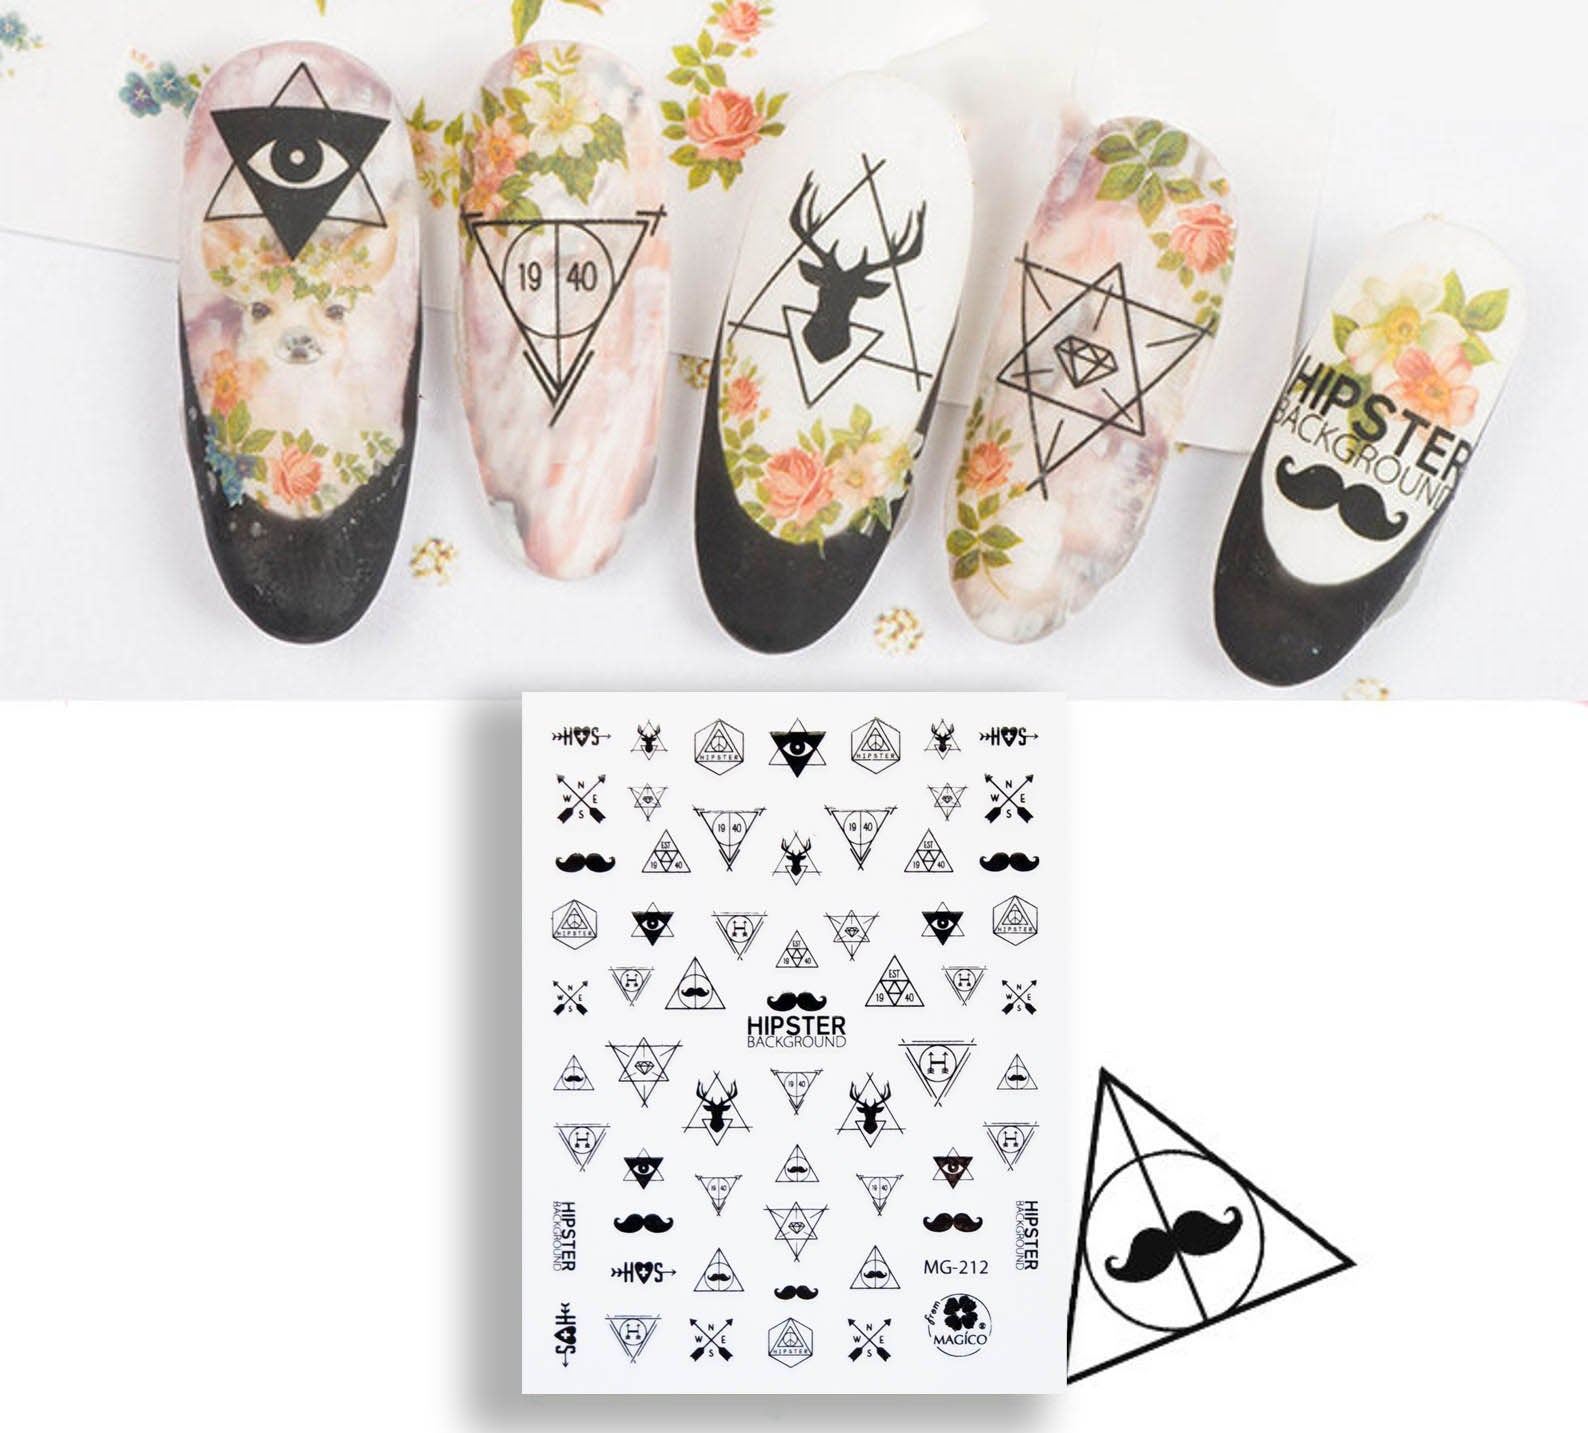 Totem Hipster nail sticker/ Hippy Totem ox bull head 3D Nail Art Stickers Self Adhesive Decals/ Black Triangle Nail Appliques